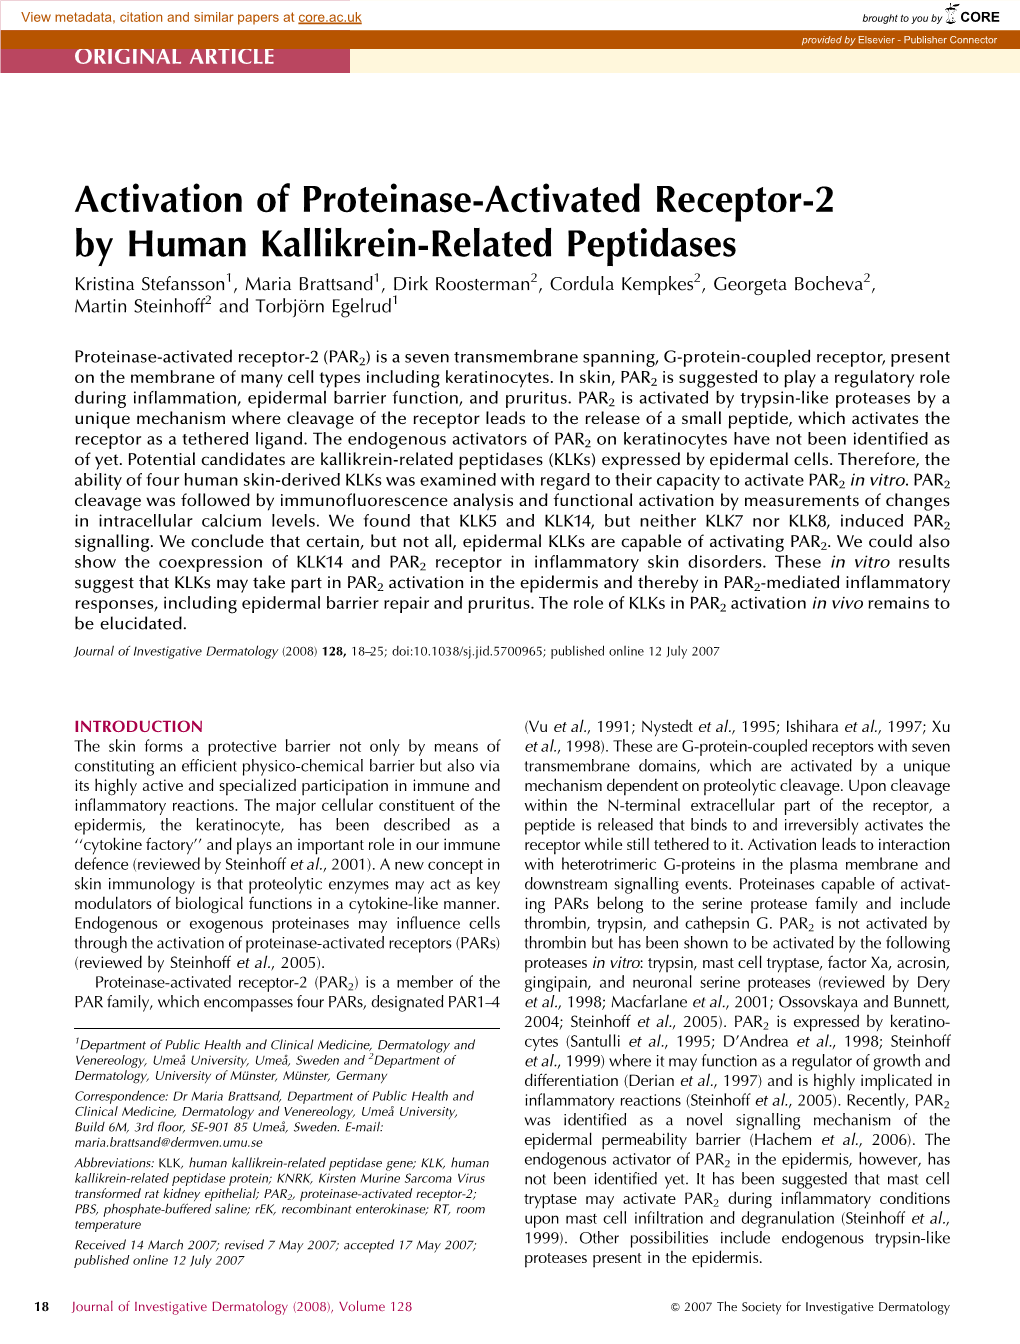 Activation of Proteinase-Activated Receptor-2 by Human Kallikrein